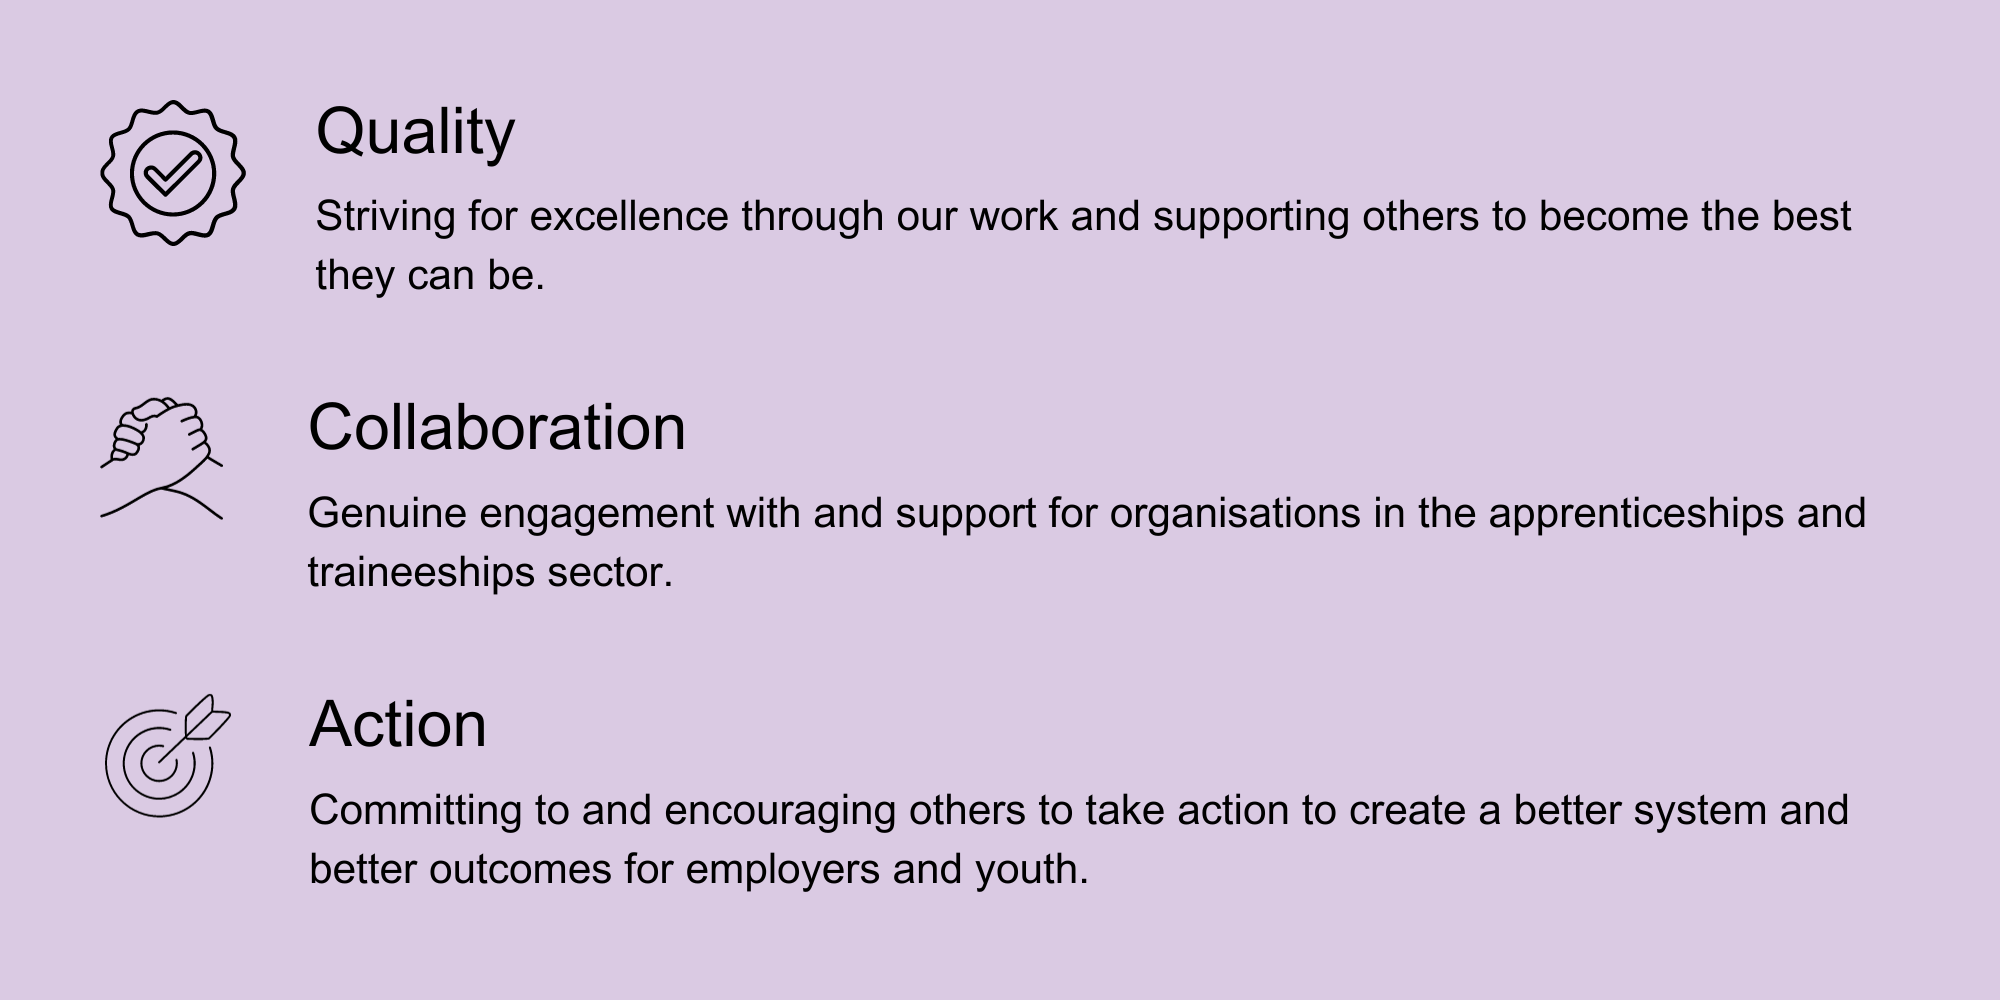 Quality: Striving for excellence through our work and supporting others to become the best they can be. Collaboration: Genuine engagement with and support for organisations in the apprenticeships and traineeships sector. Action: Committing to and encouraging others to take action to create a better system and better outcomes for employers and youth.